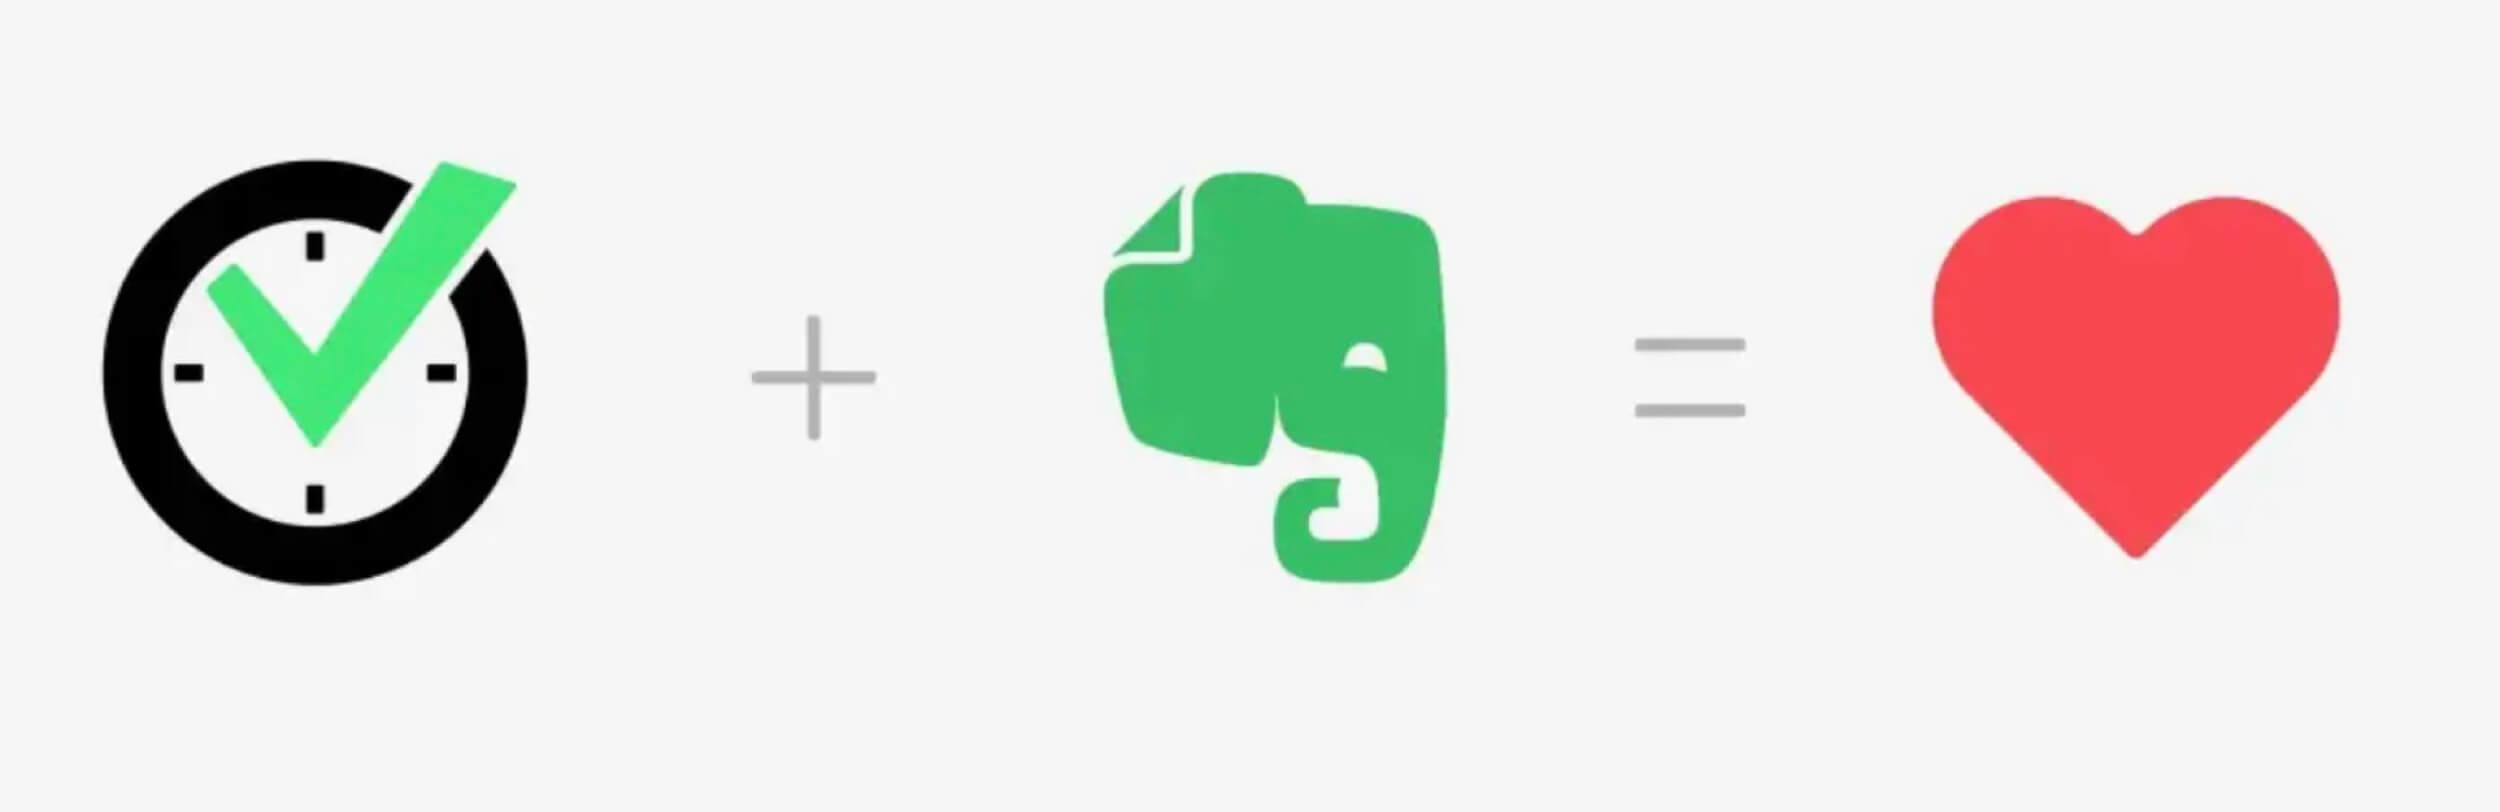 Evernote - why I love(d) it, how it almost acquired Nozbe and what’s next for your “external brain”?